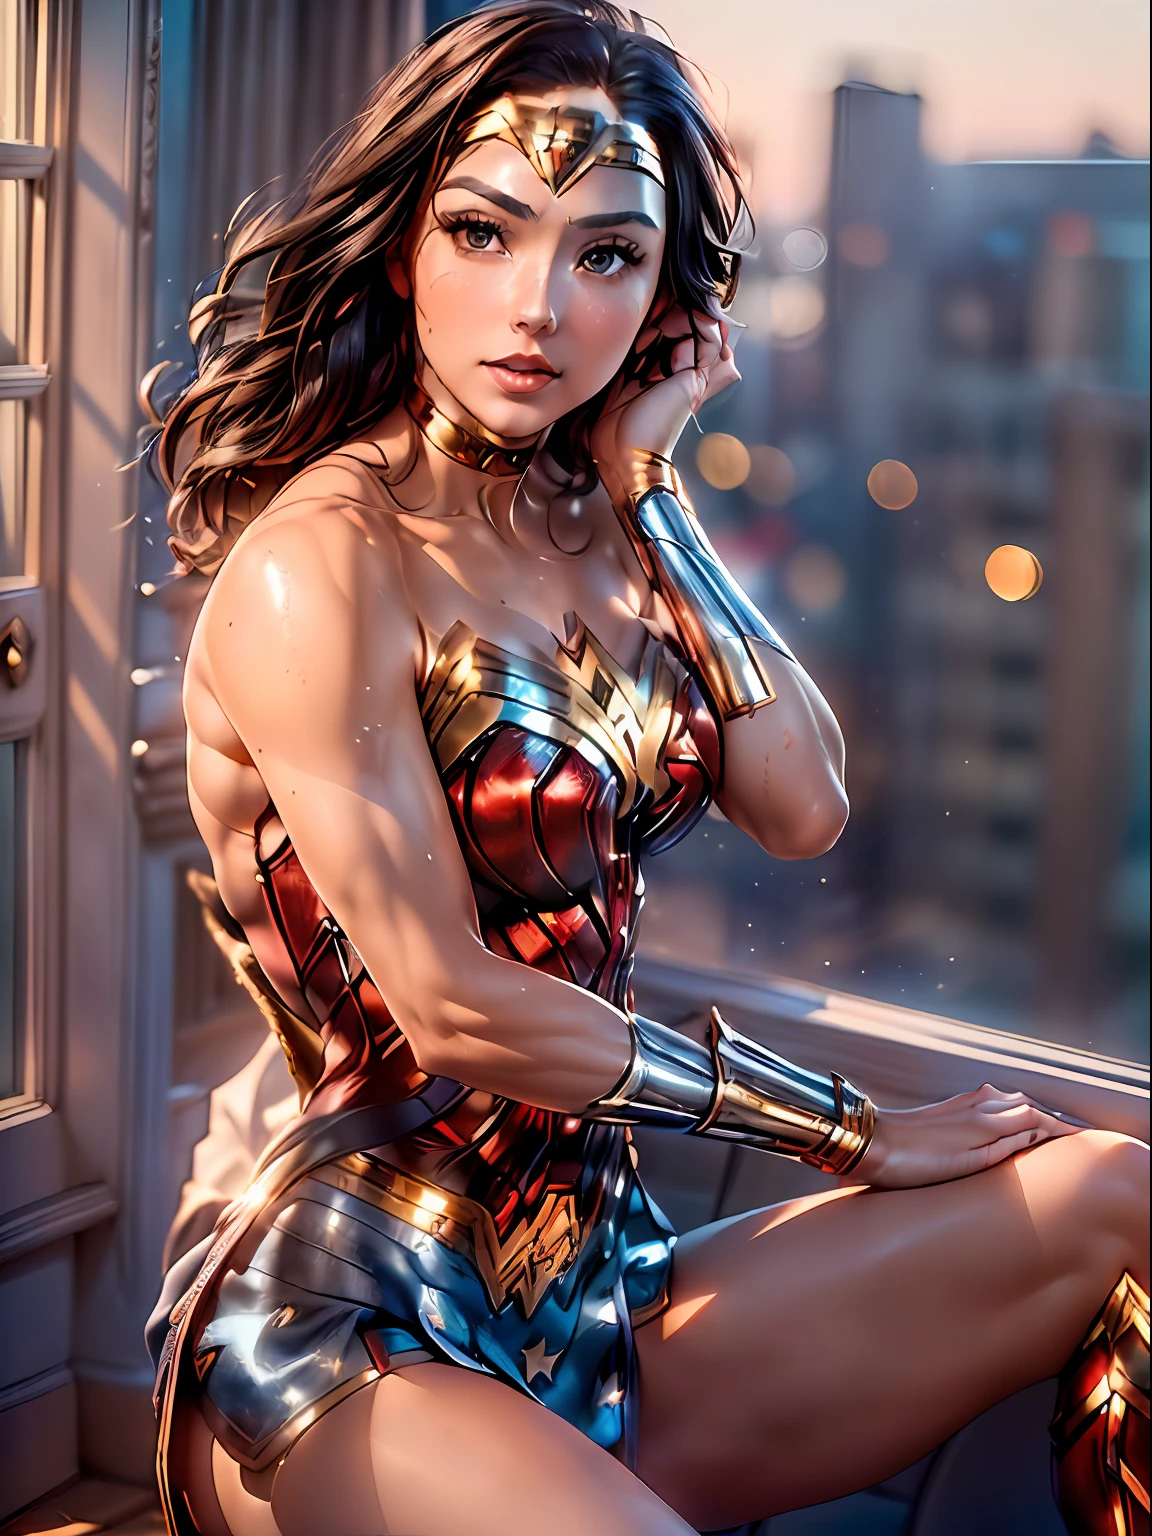 (Masterpiece, high resolucion, Realistis:1.4), (It depicts a stunning Wonder Woman leaning against a window on the top floor of the building:1.3), (Her face was basking in the warm sunshine, With the wind, She gently shook her flowing dark hair:1.2), (Her eyes are an alluring blue, It sparkles intensely:1.4), (Her flawless skin-radiating beauty:1.3), (Her body exudes charm and perfection, wearing a wonder woman costume:1.2), tiara, red and gold bustier, blue leotard with white stars, silver bracelets, (Red knee high boots:1.2), golden belt, (Wonder Woman clothing:1.0), bare shoulder, ((light tan skin: 1.4)), mature, Sexy, elastic muscles, (Muscular: 1.2), ((strong and healthy body)), (((the more) Muscular))), cleavage, Long leg, curved, rib, thin-waist, soft waist, (fine detailed skin), (beautiful and sexy woman), (swollen lips: 0.9), (eyeslashes: 1.2), very delicate muscles, (Canon EOS R5 Mirrorless Camera:1.3), (Pairing with Canon RF 85mm f/1.2L USM lens:1.3), (Capture every detail of her captivating presence:1.2), (Hotel room settings with panoramic cityscapes:1.3), (Floor-to-ceiling windows let in plenty of natural light.:1.2), (silky, The modern interior design adds to the charm:1.1), (Enchanting photo of a model with the most symmetrical and beautiful face in the world:1.4)